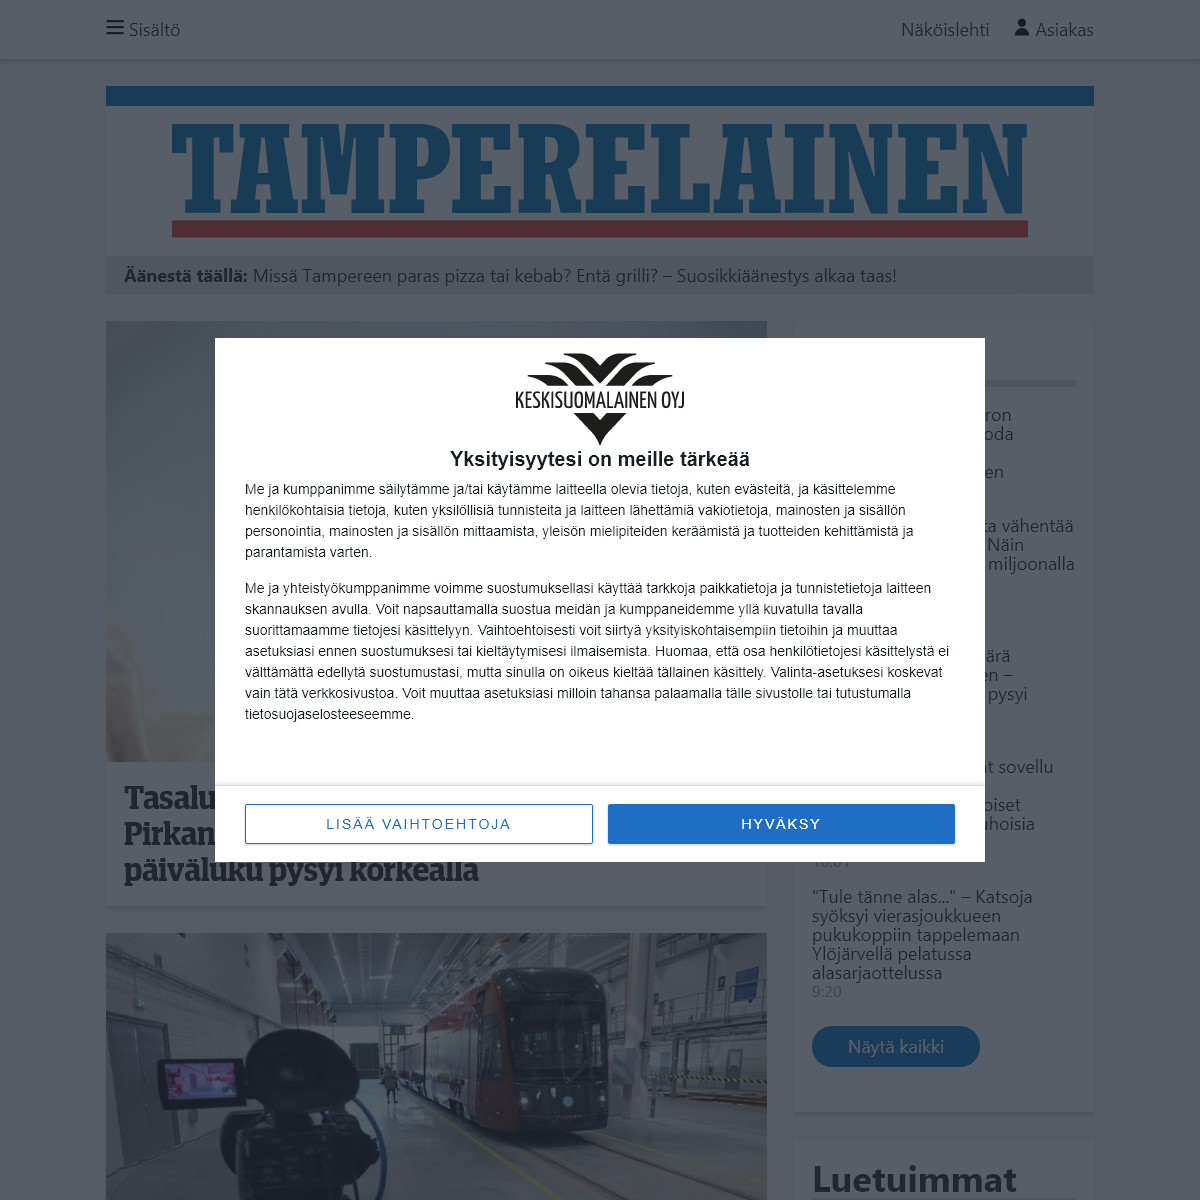 A complete backup of tamperelainen.fi